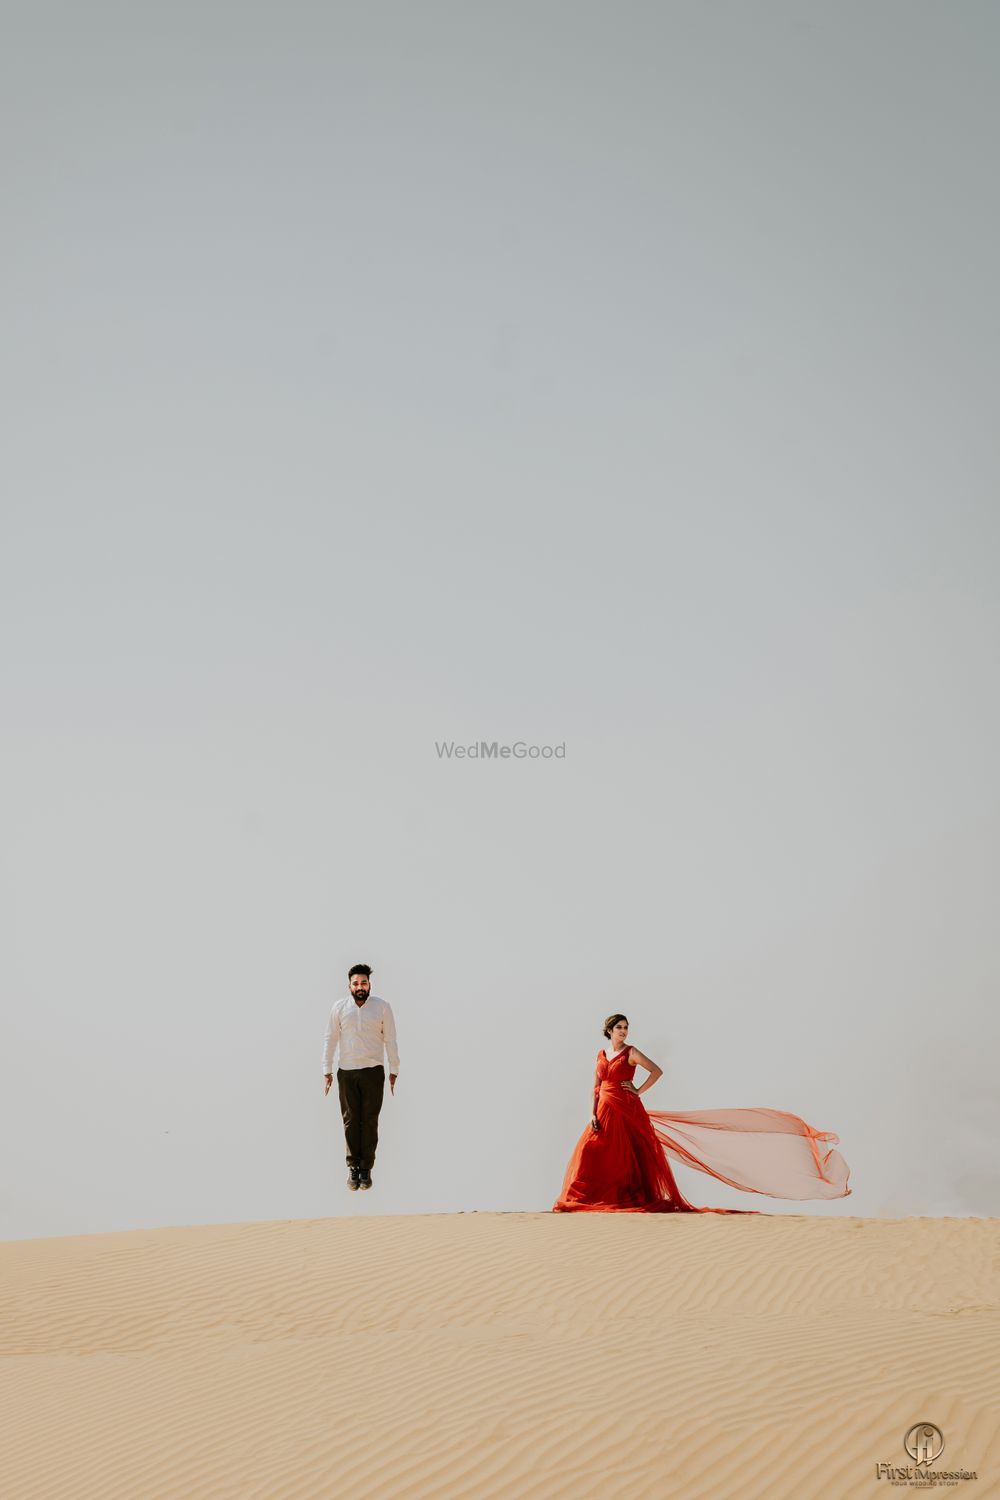 Photo By First iMpression - your wedding story - Photographers